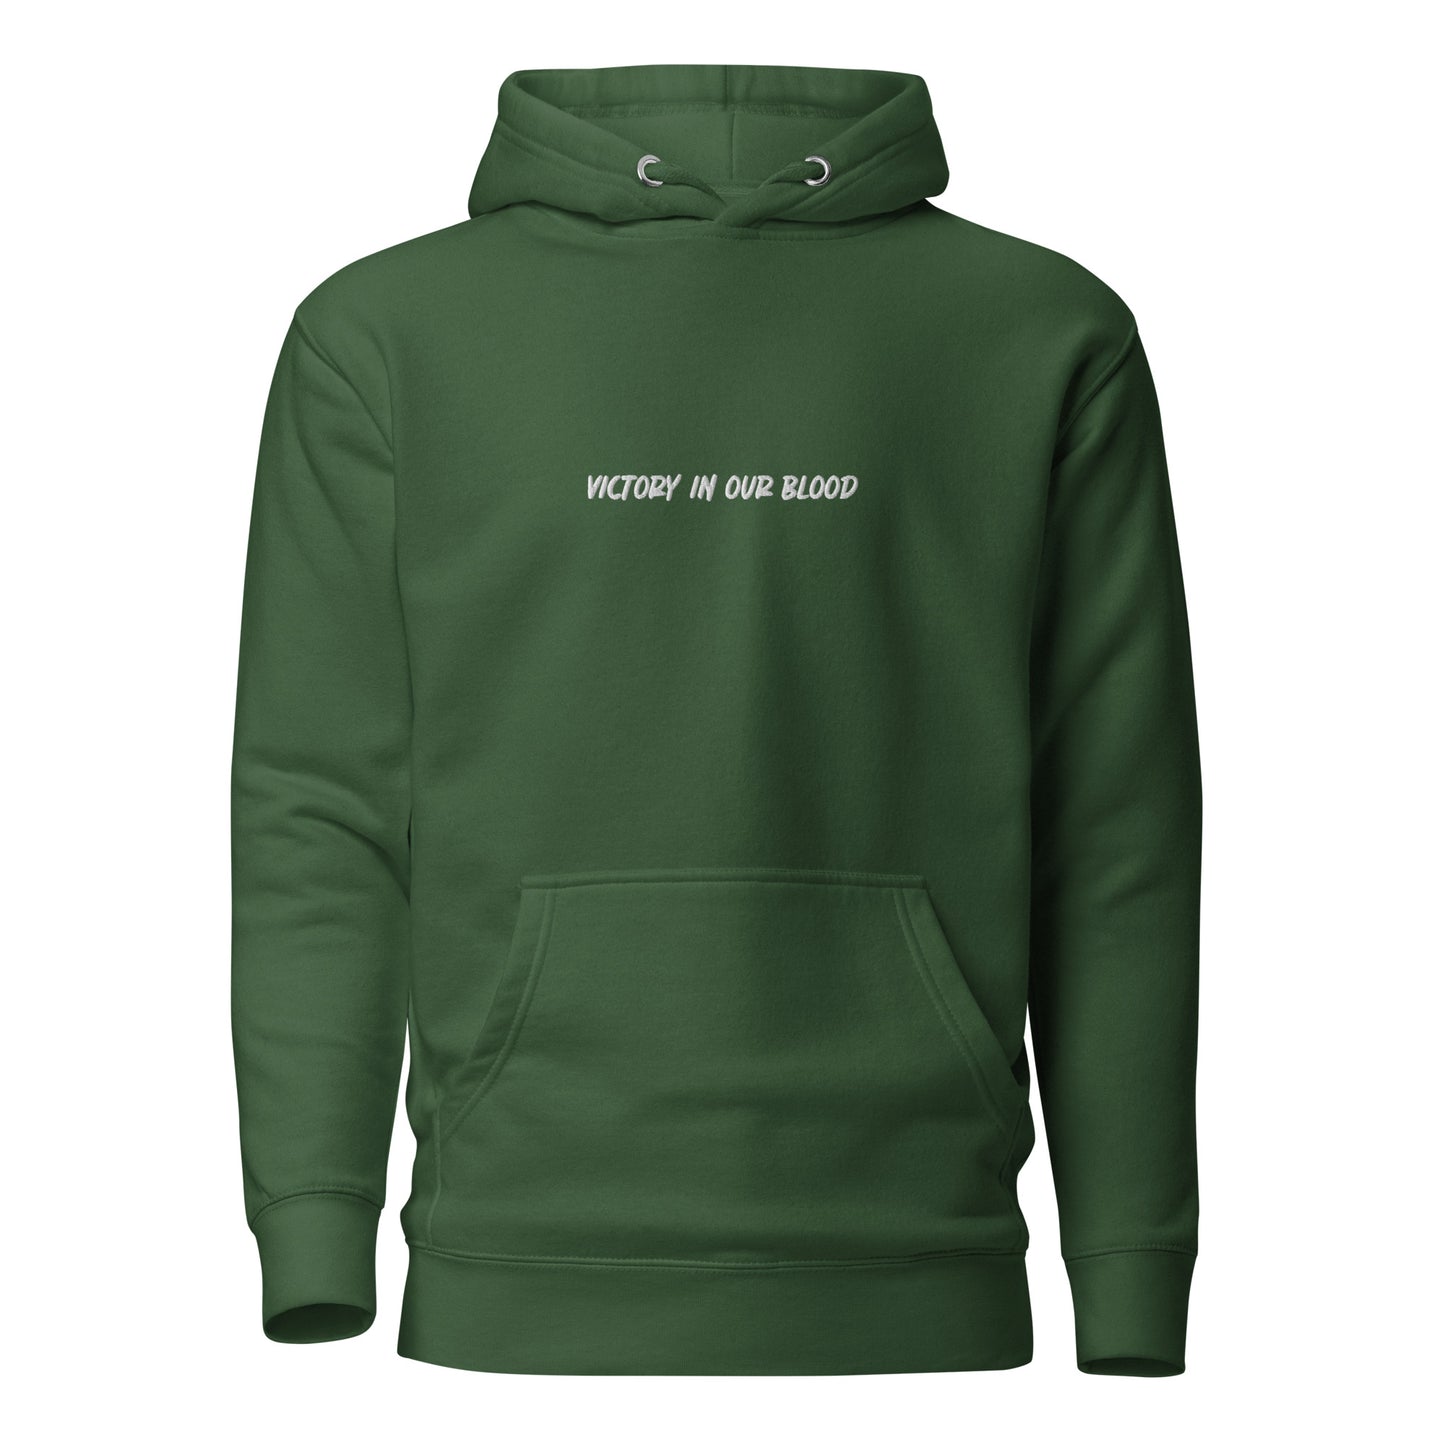 Vipers Hoodie By Valor Vipers